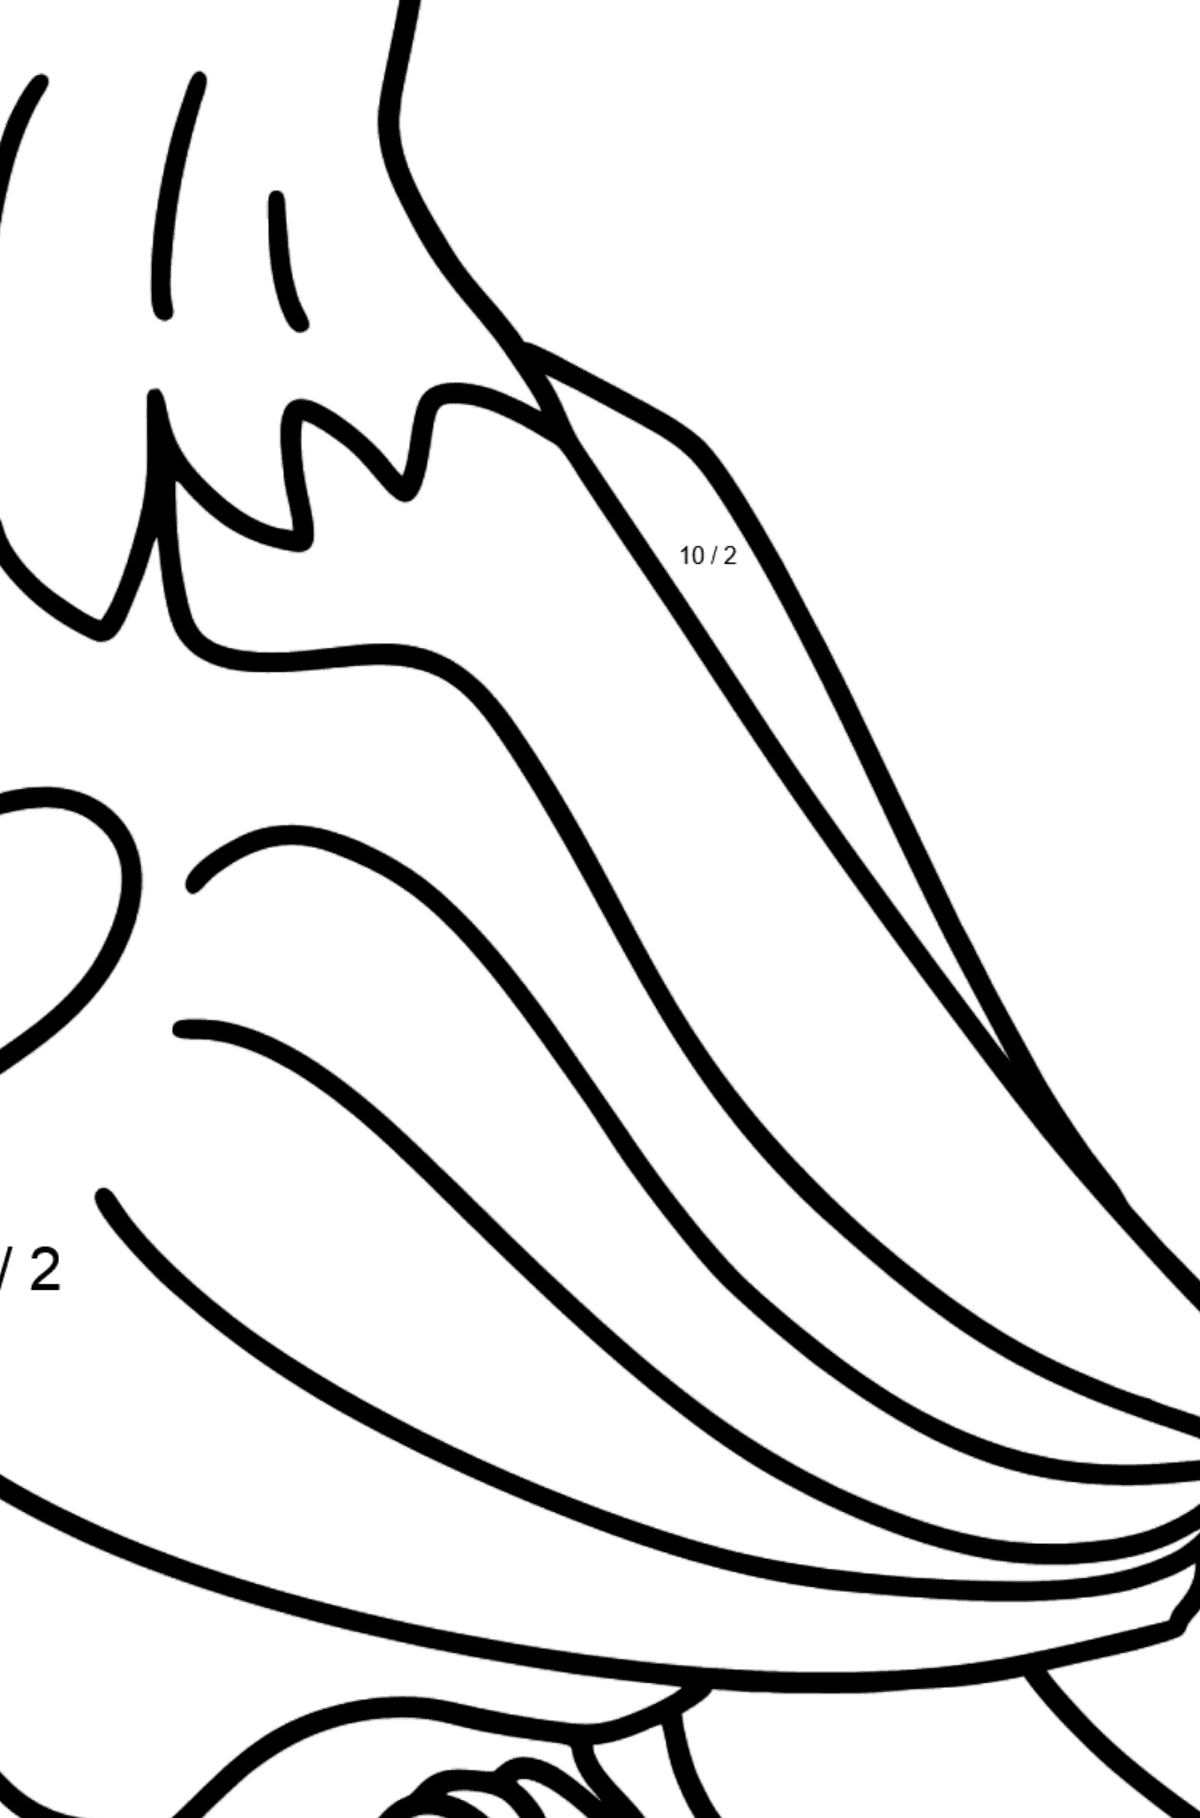 Hawk coloring page - Math Coloring - Division for Kids